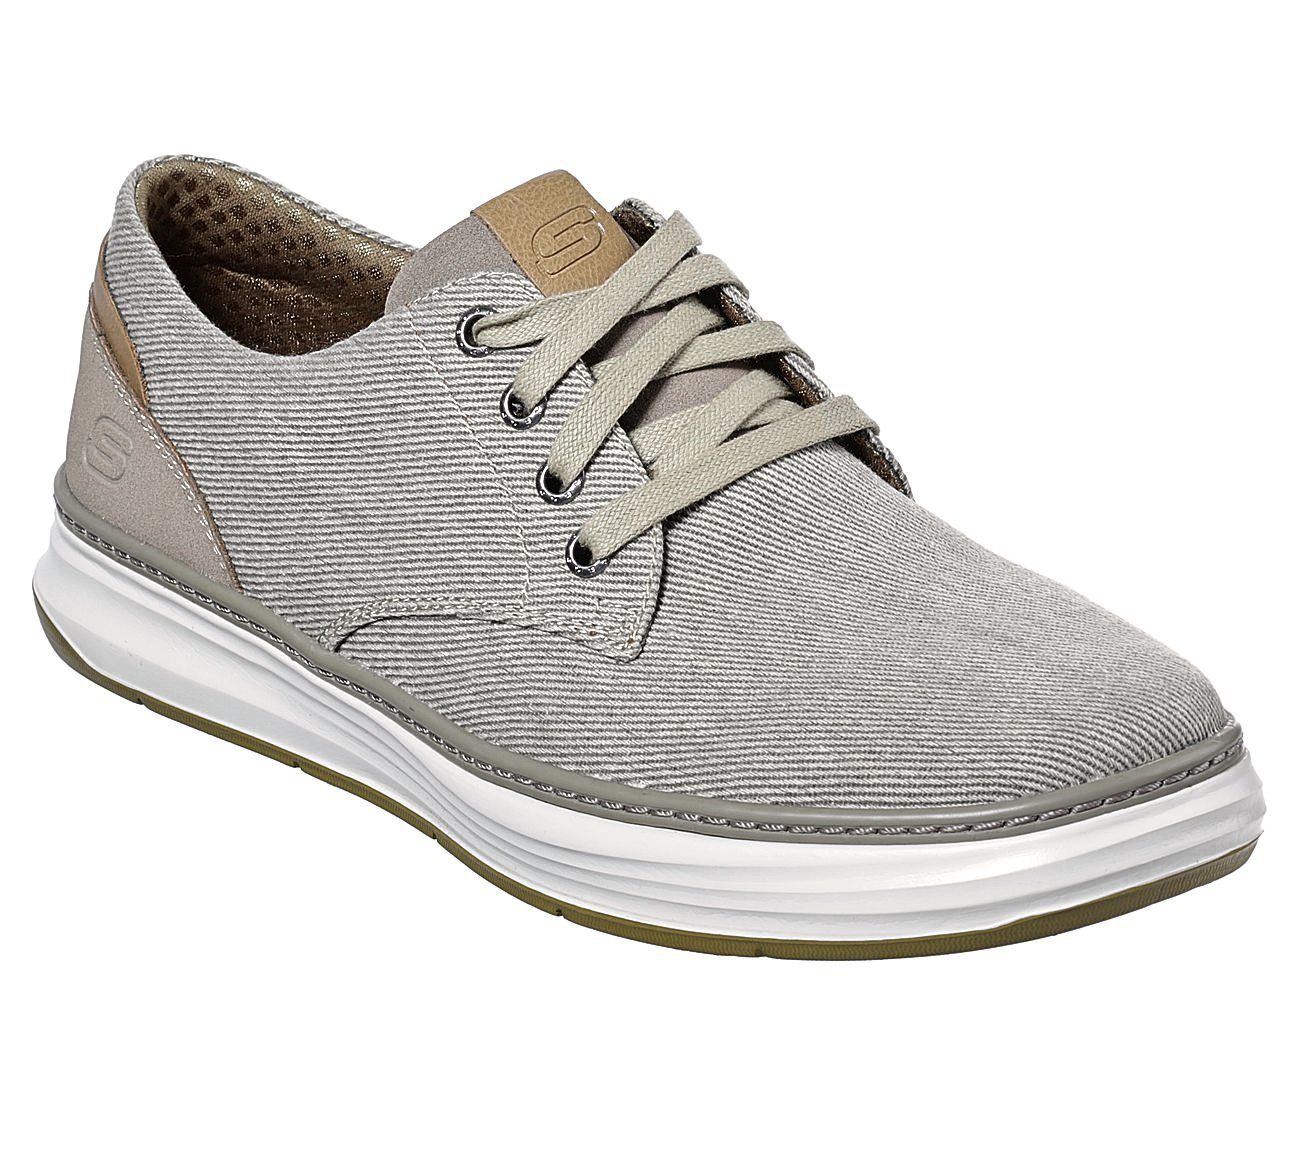 10 Best Business Casual Sneakers [Feb 2022]